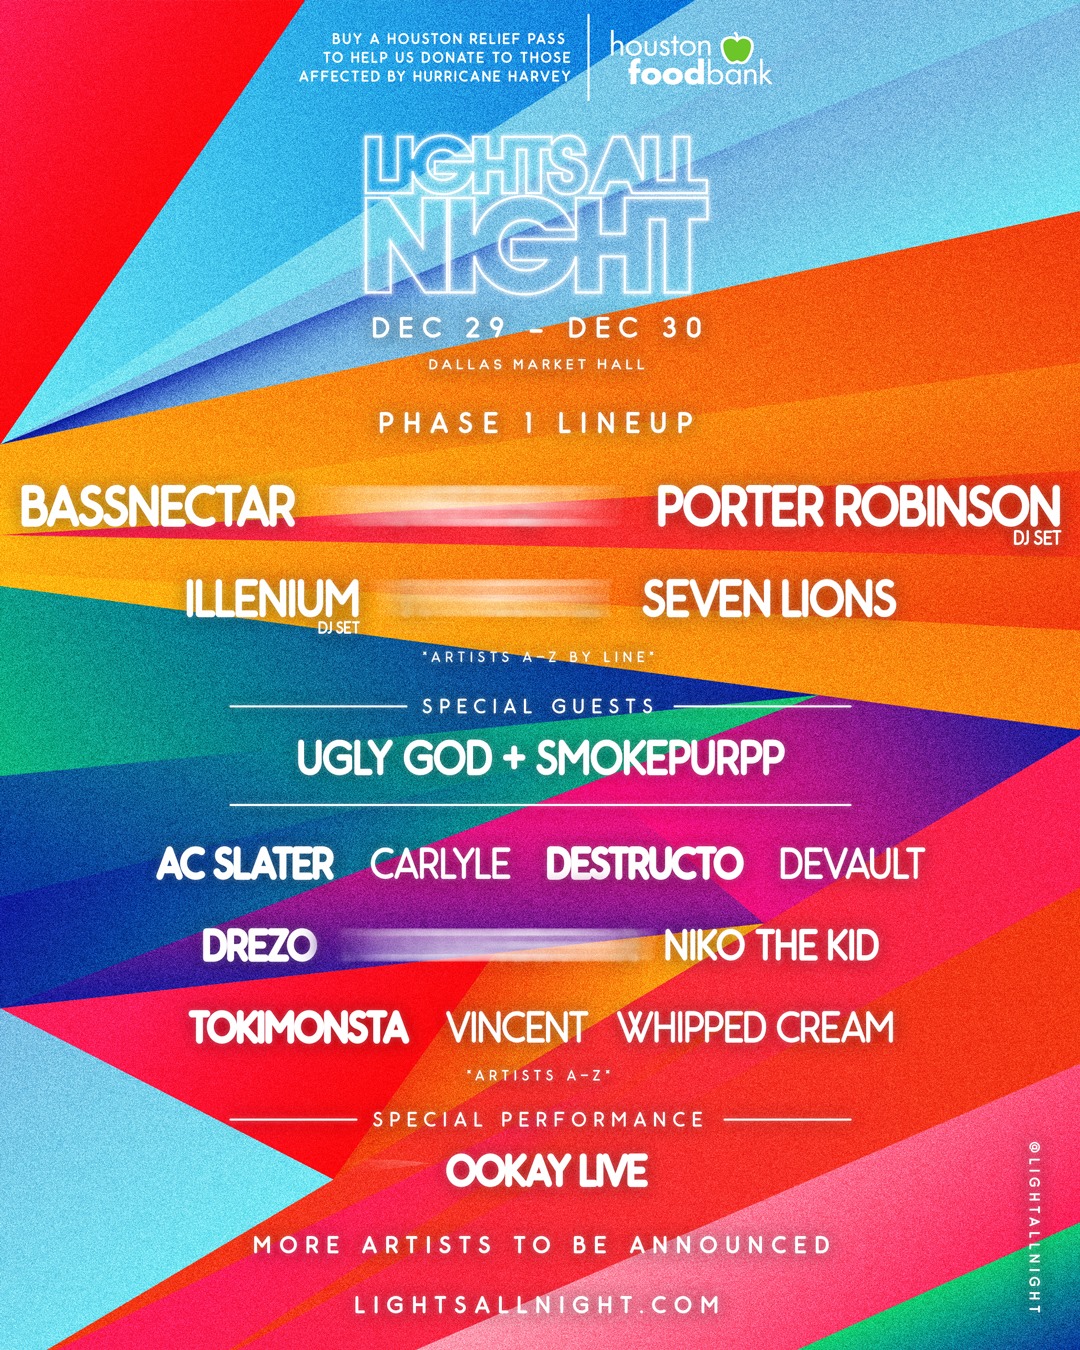 Lights All Night Just Unveiled Their Lineup And Will Be Helping Those ...